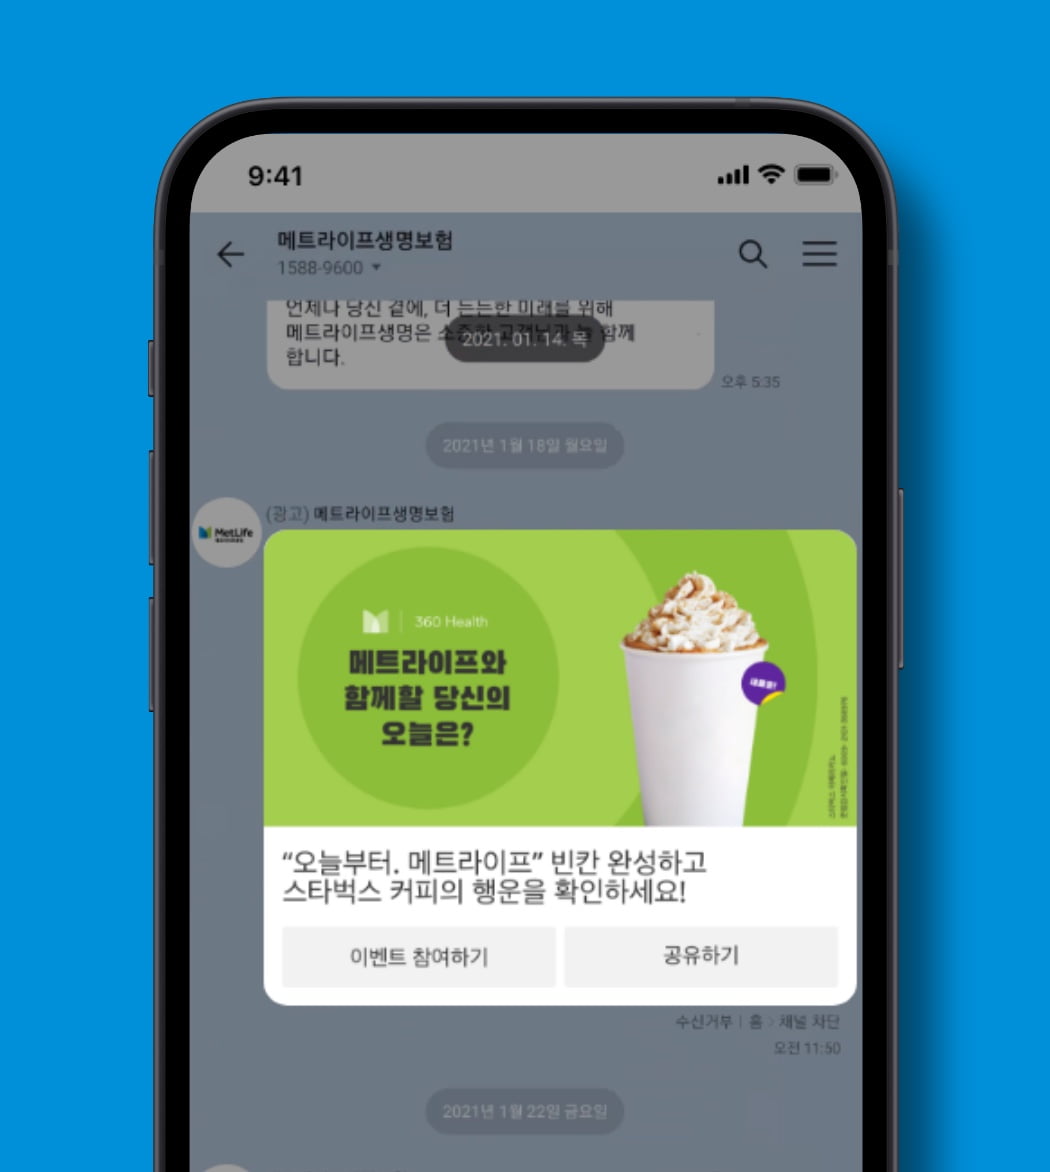 Phone screen showing promotion on Kakao.